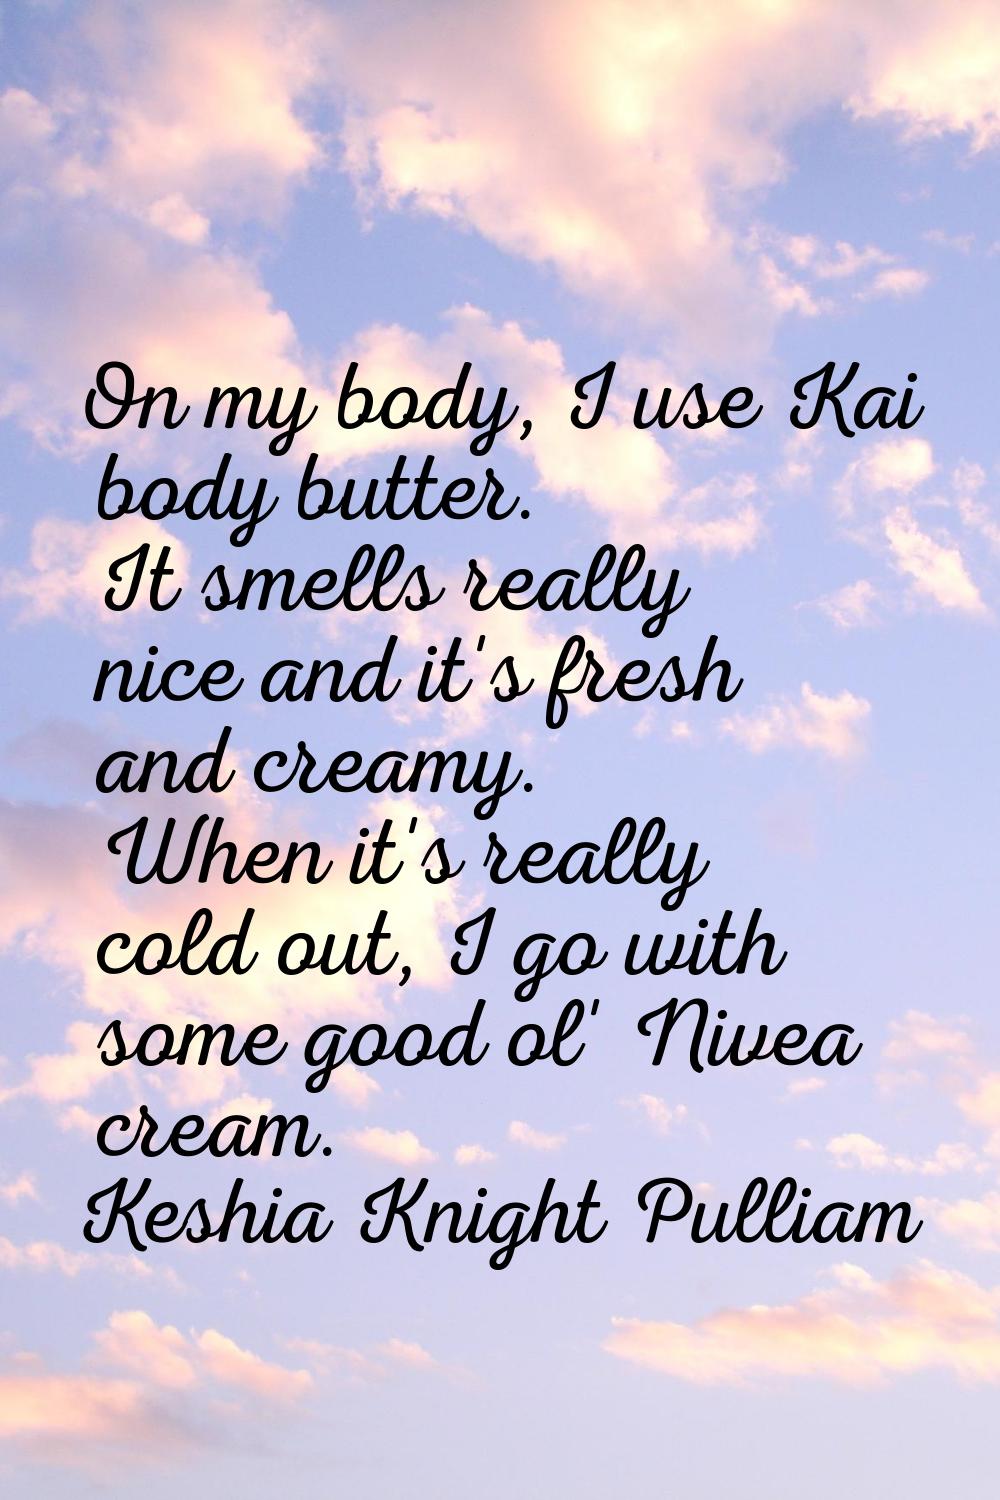 On my body, I use Kai body butter. It smells really nice and it's fresh and creamy. When it's reall